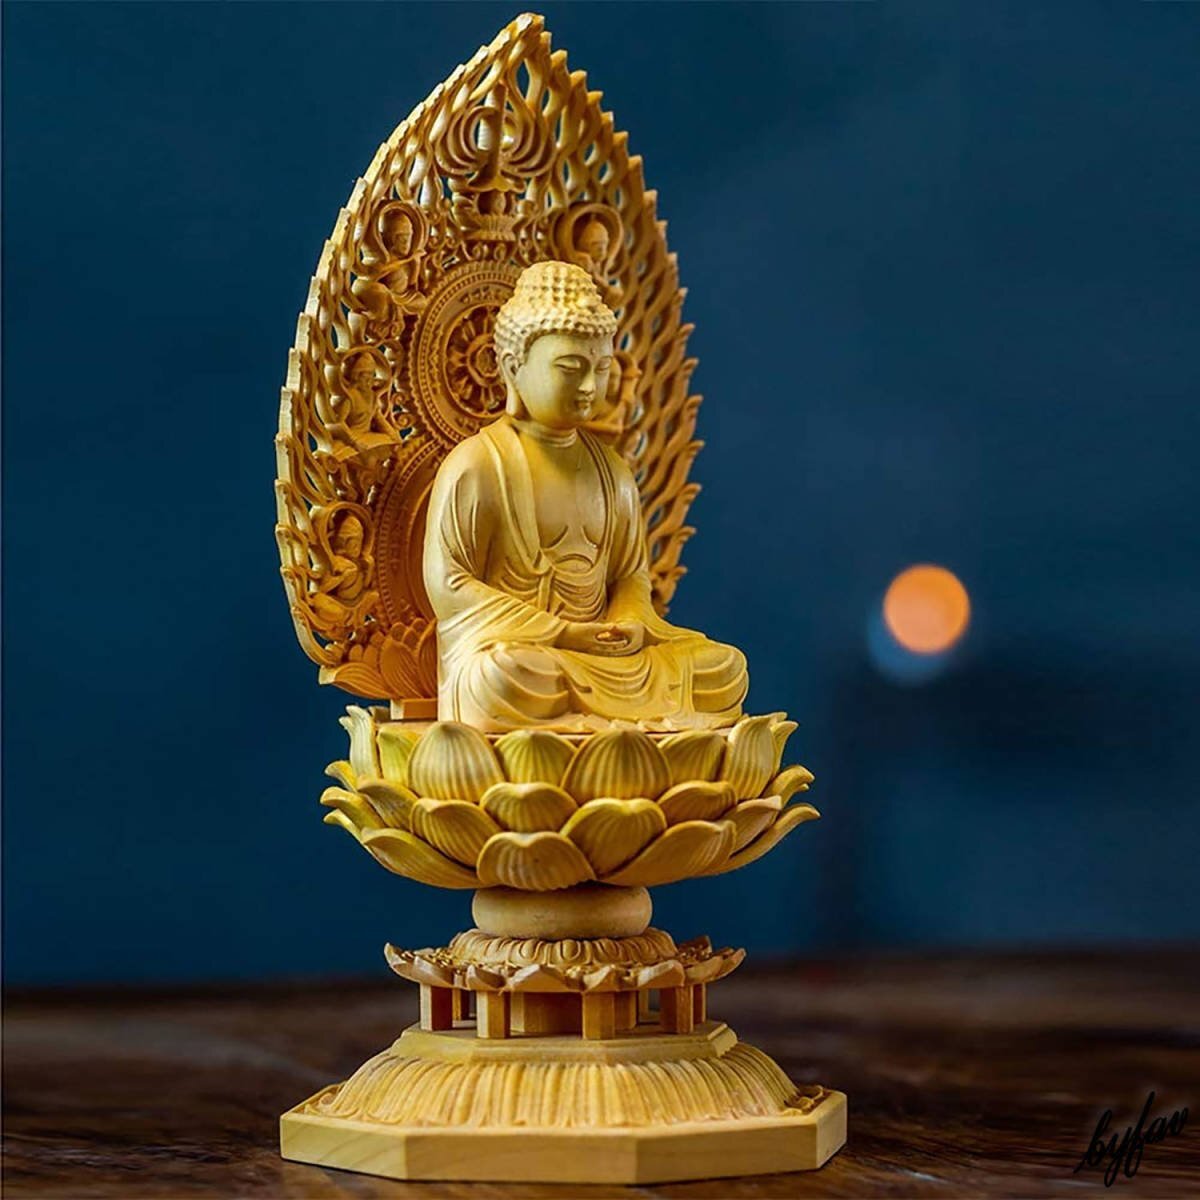  finest quality goods *.... family Buddhist altar Buddhist image .book@..... settled . yellow .. handicraft tree carving tsuge family Buddhist altar amulet ..... except . feng shui protection book@... Buddhist altar fittings 